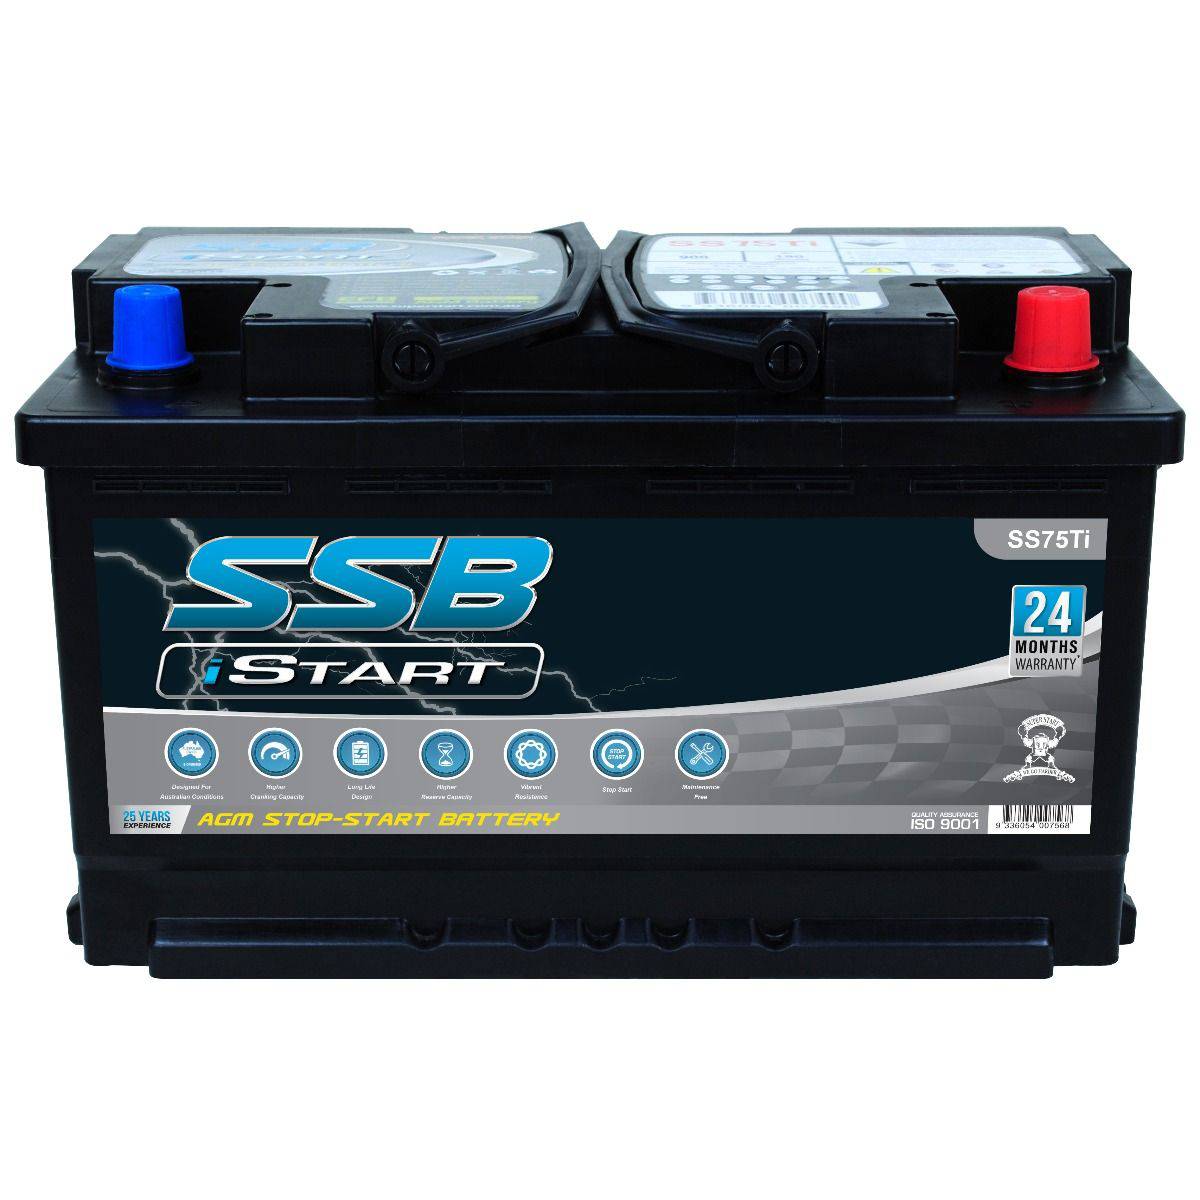 4X4 Battery Suits Ford Ranger 2015 2.2L Manual PX MK11 (Online Only)